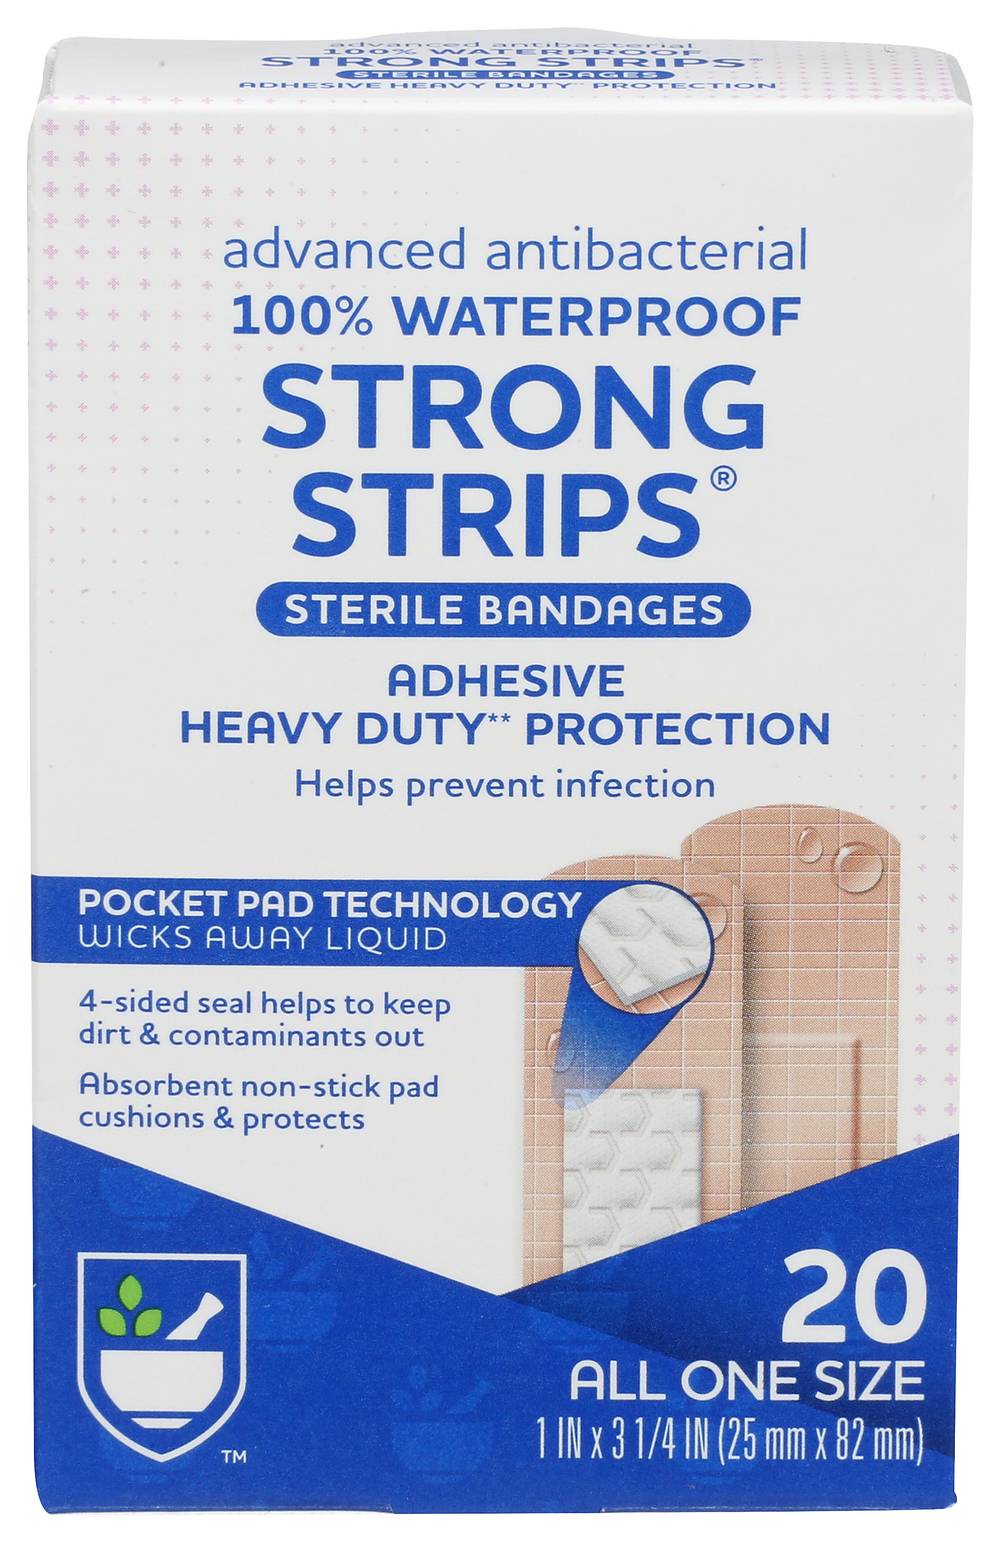 Rite Aid First Aid Advanced Antibacterial Waterproof Strong Strips Adhesive Bandages (20 ct)